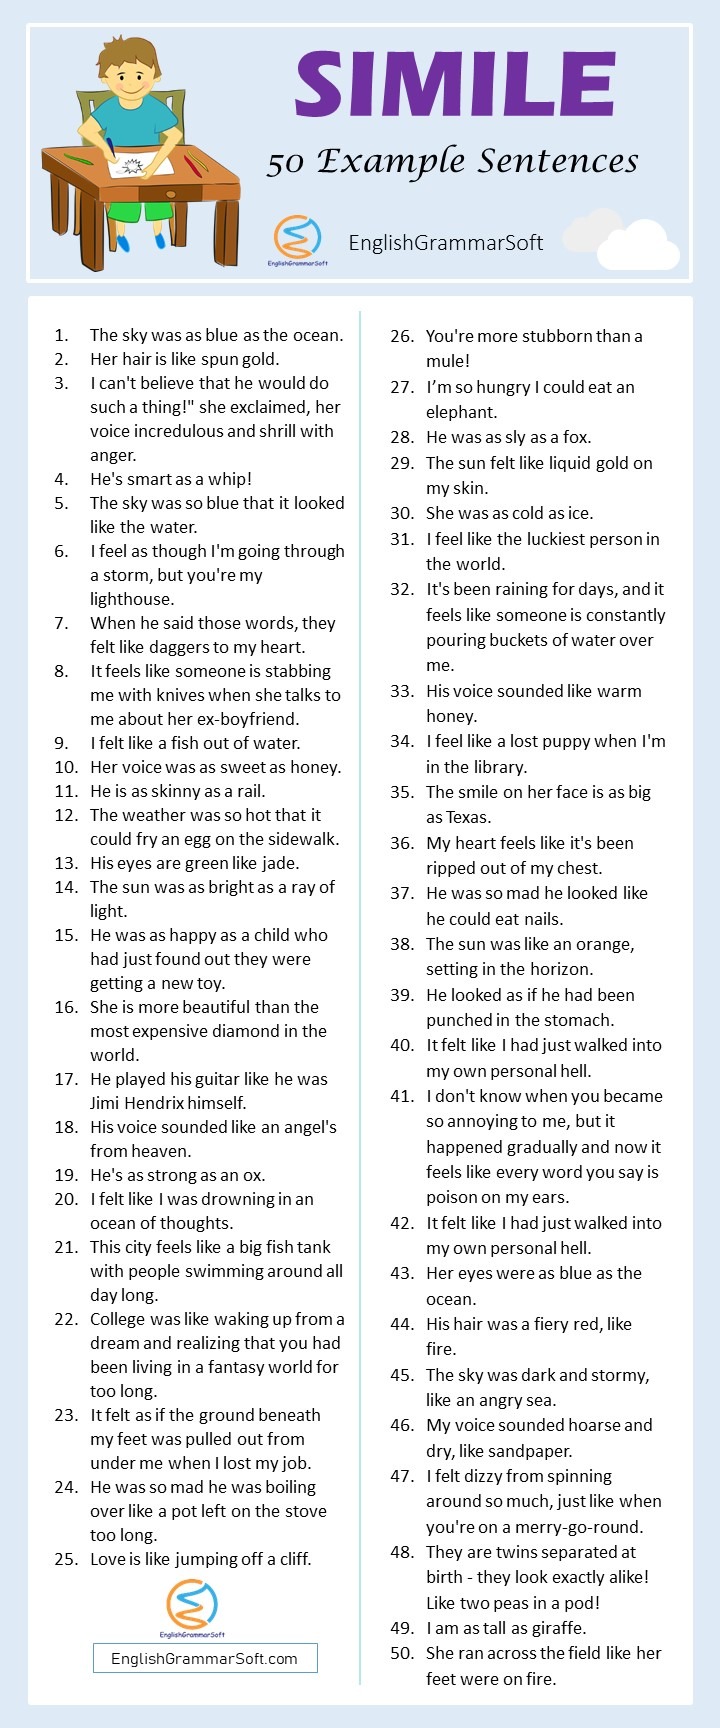 50 Sentences of Simile (Common Examples of simile)